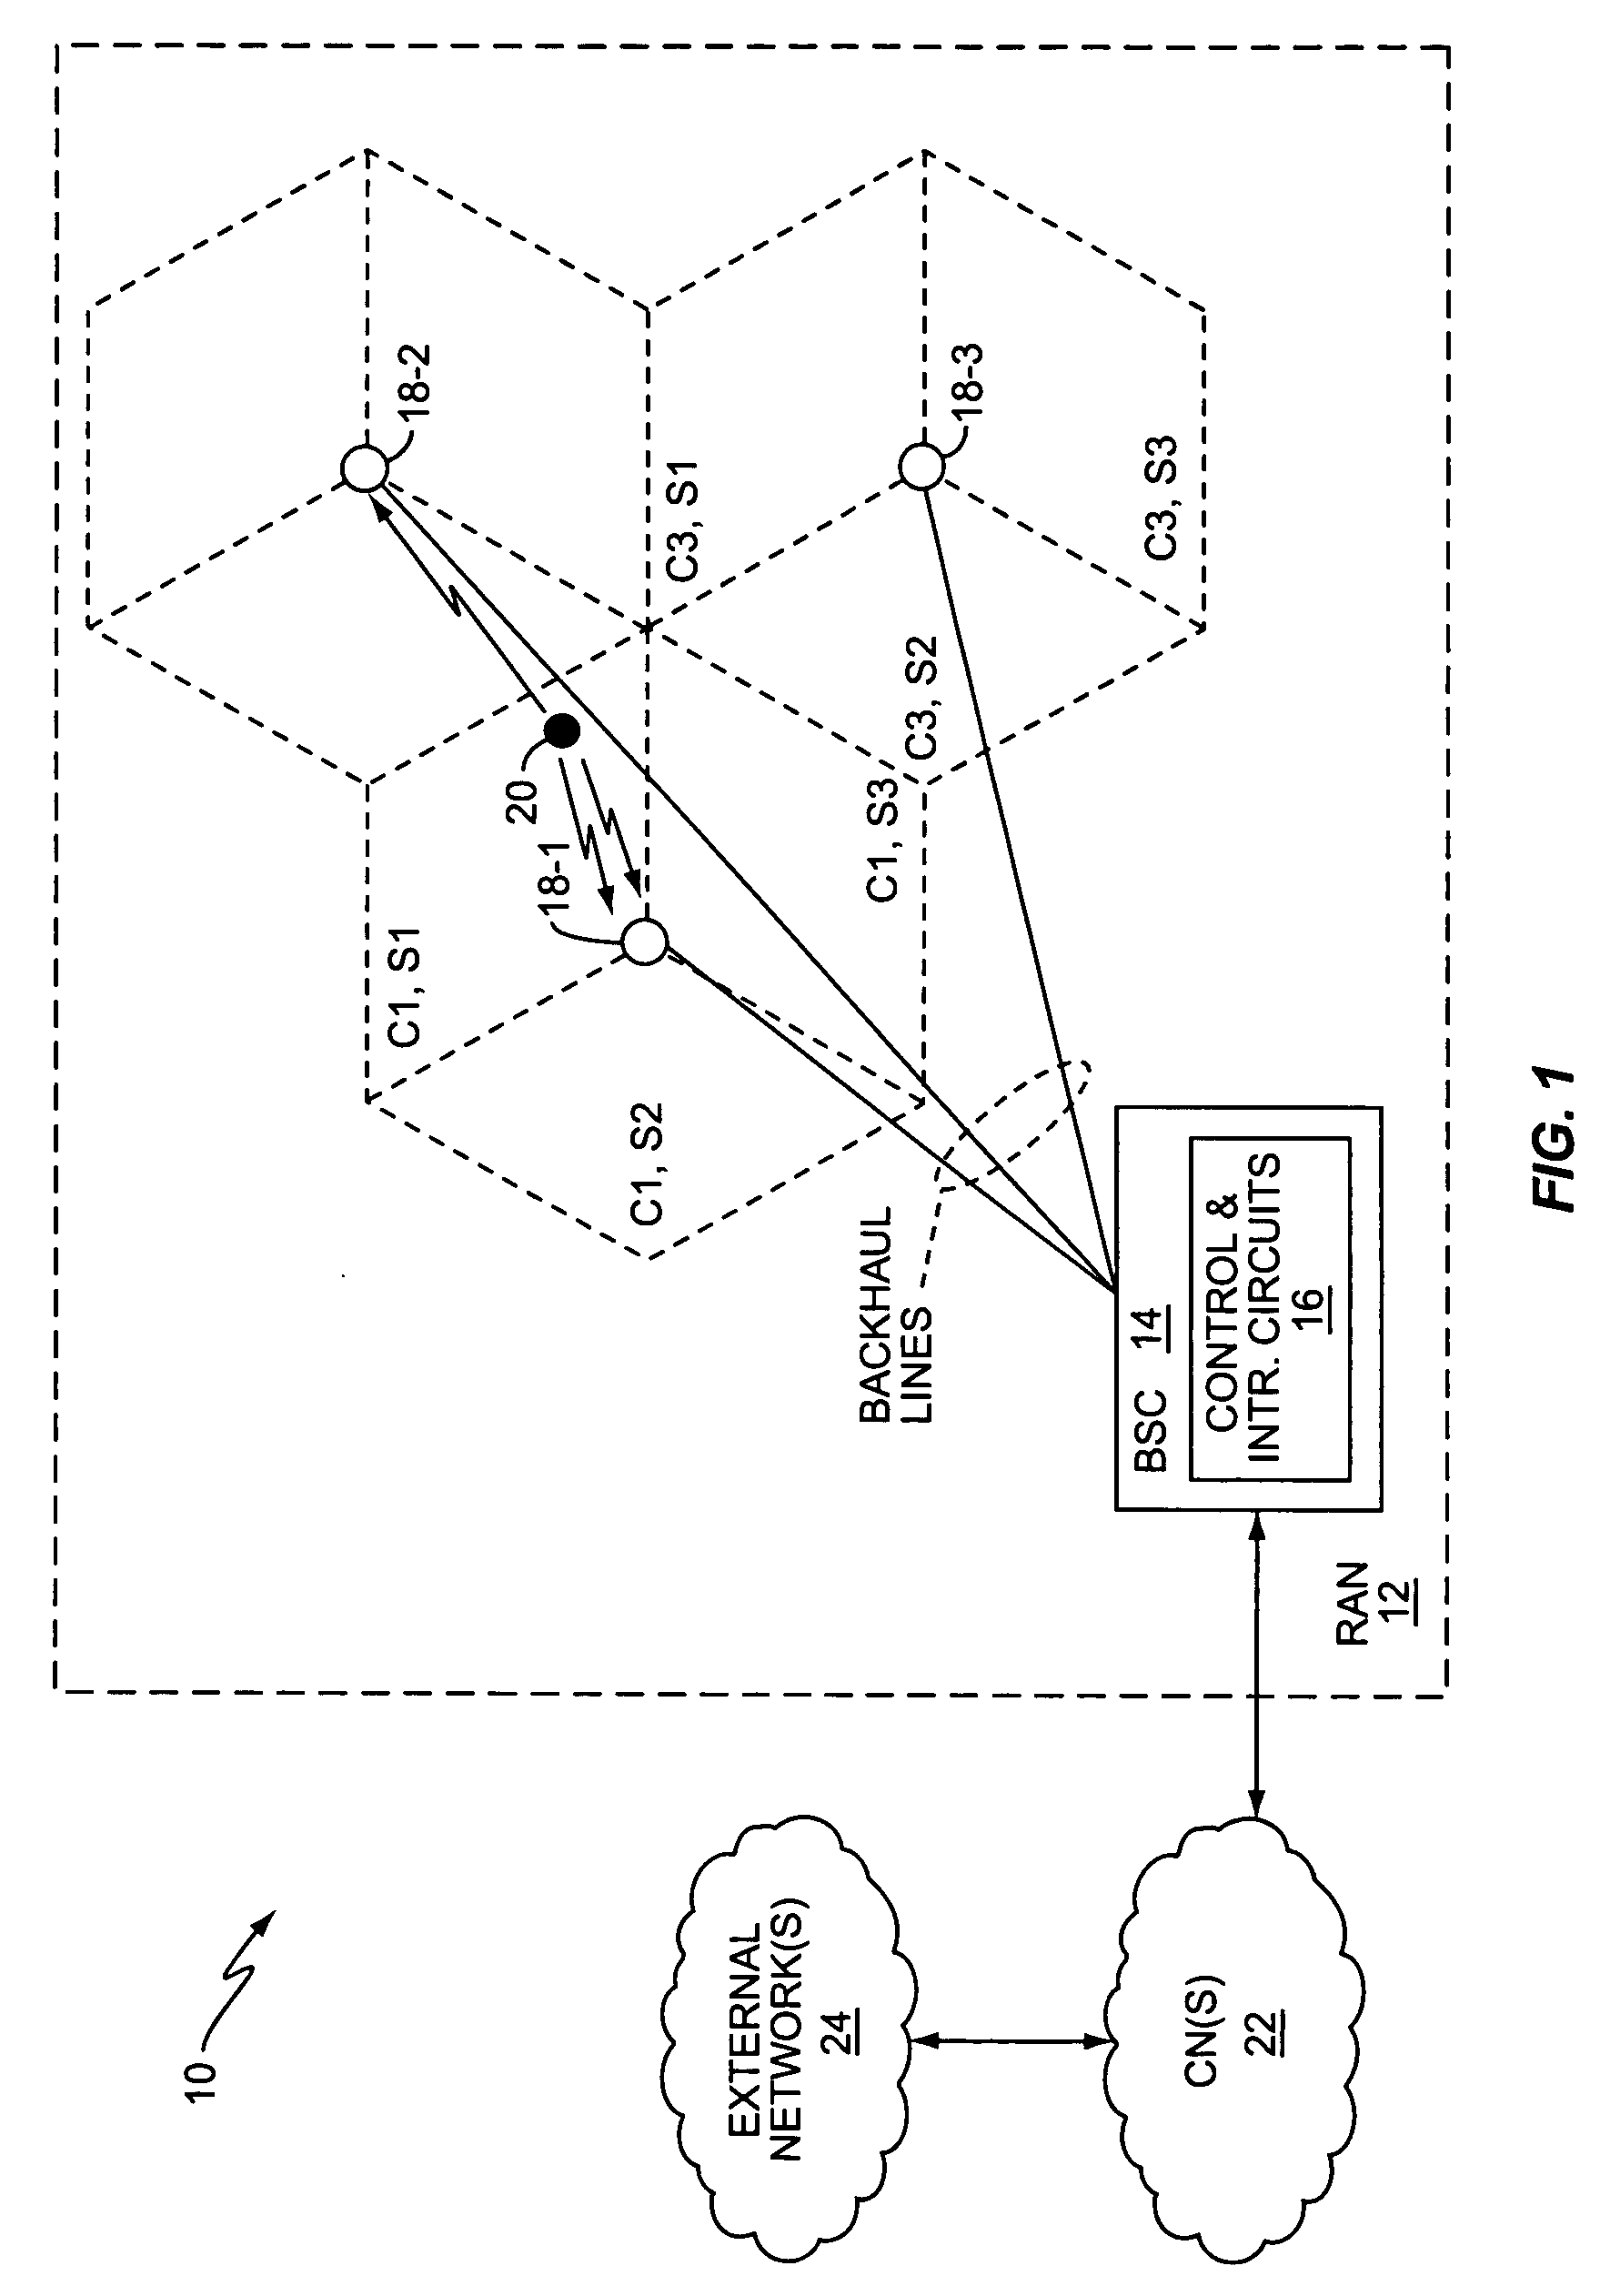 Method and apparatus for cell-site ARQ generation under softer handoff conditions